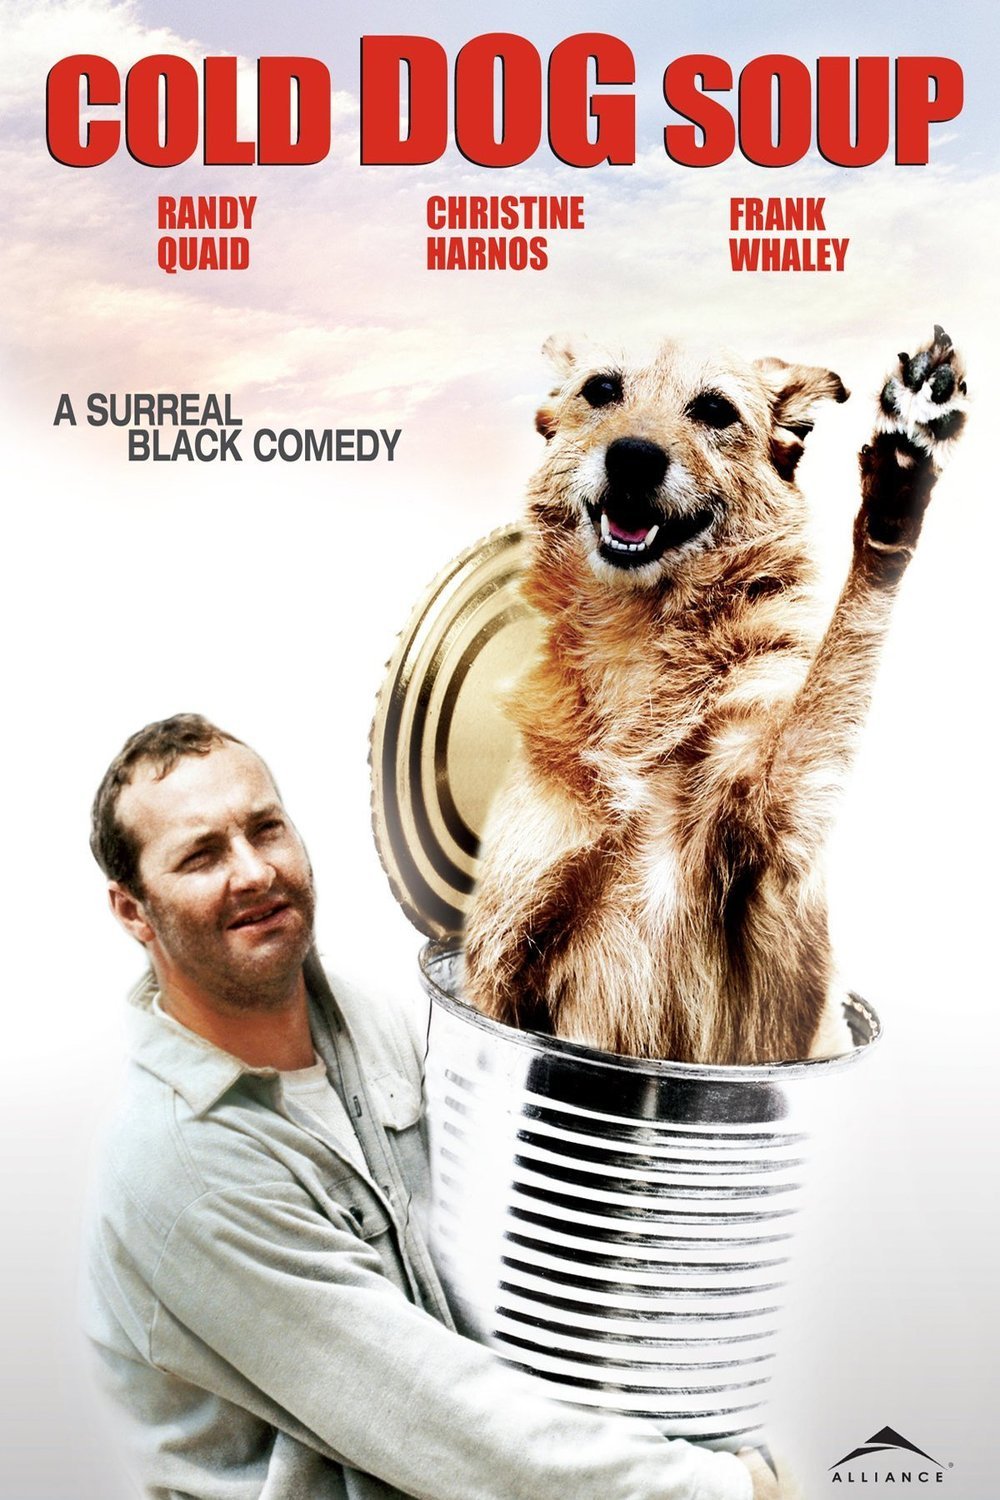 Poster of the movie Cold Dog Soup